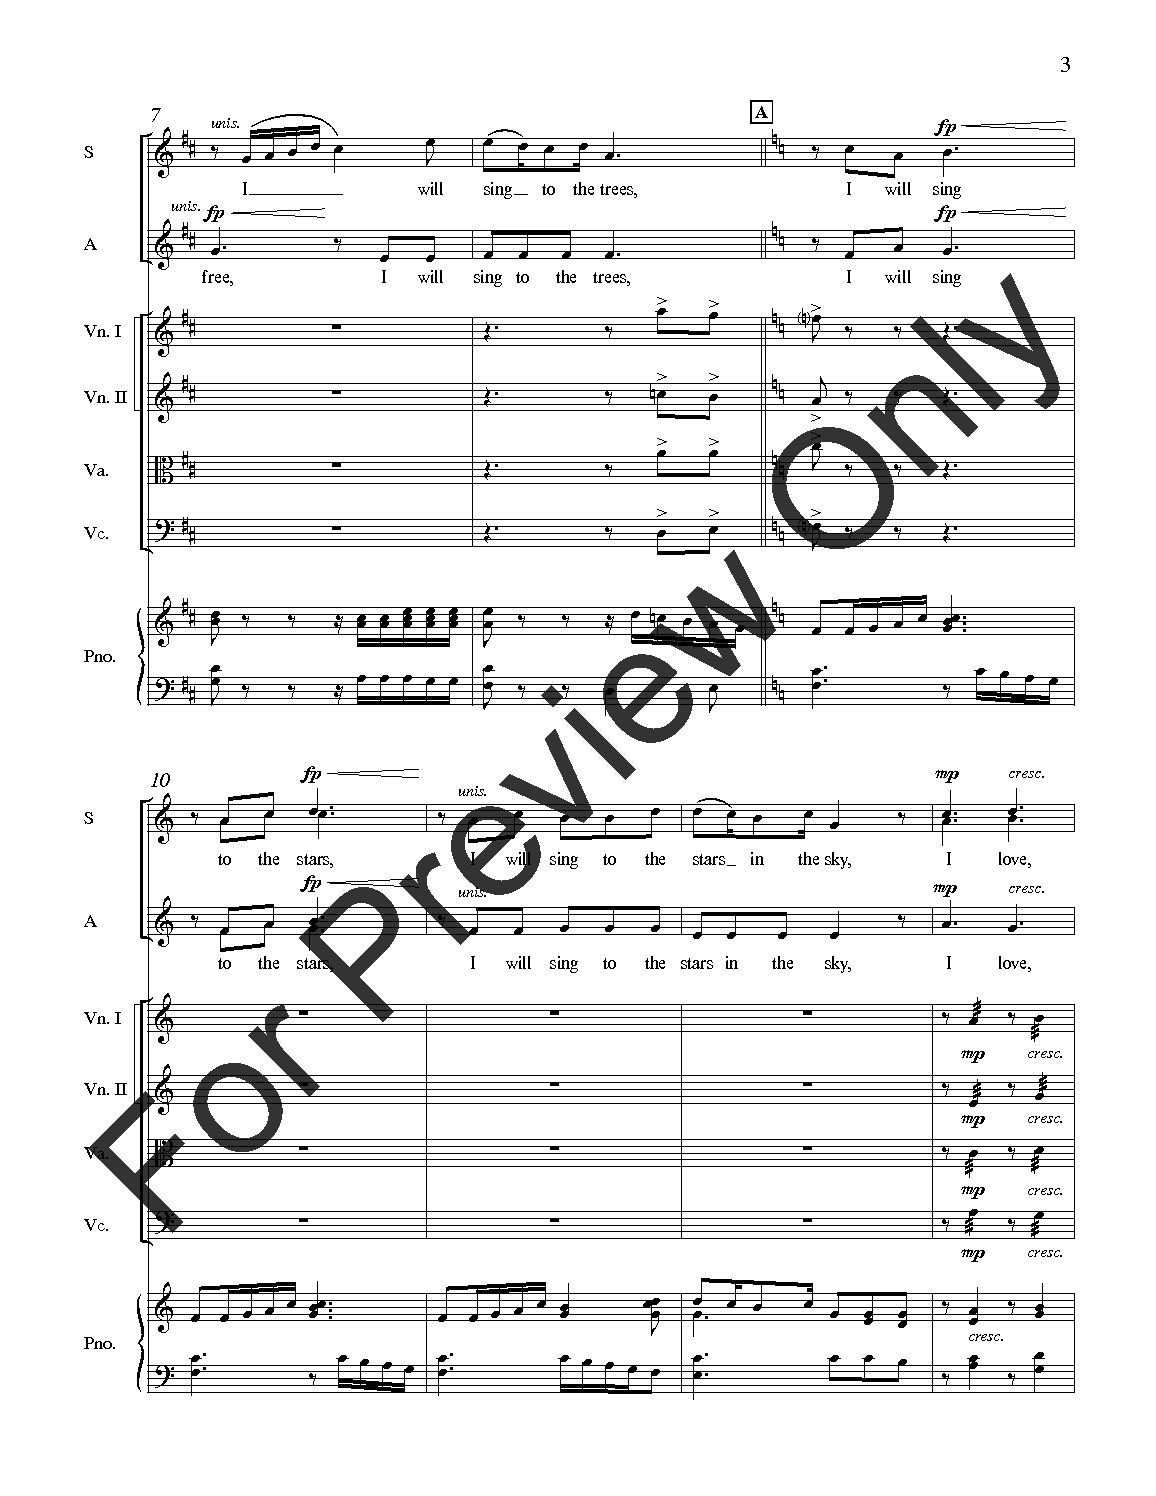 Joy from I Will Sing to the Stars Full Score